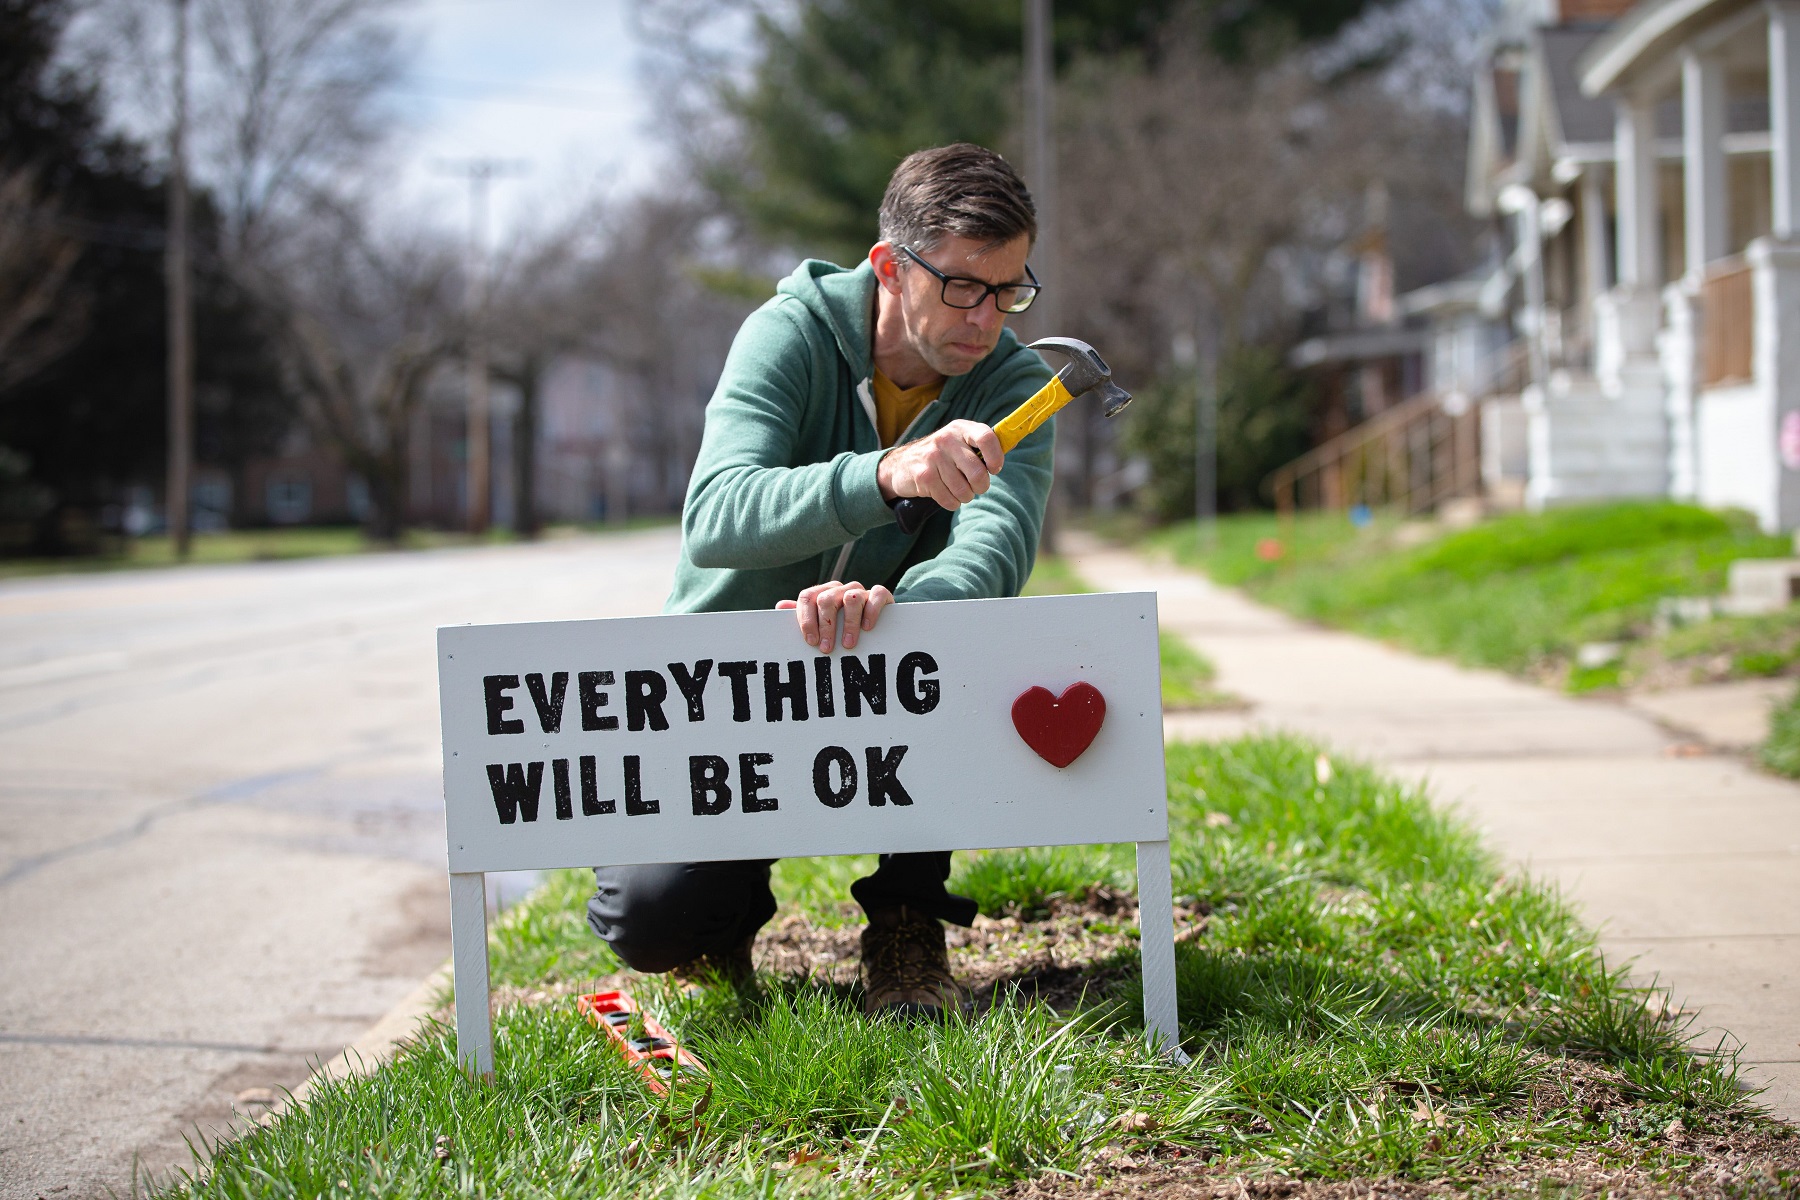 Dave Heinzel installs one of his handmade signs with the saying &quot;Everything Will Be Ok&quot; along with a 3D red heart that he he handmade in response to the COVID-19 pandemic in front of a home on West Lawrence Avenue, Wednesday, March 25, 2020, in Springfield, Ill. Heinzel started taking requests for the signs on social media and the demand soared to over 200 requests. &quot;I really think everything will be okay,&quot; said Heinzel. &quot;It&#039;s going to get worse and it&#039;s not going to be fun and we&#039;re going to lose people we know, but it will be okay.&quot;Usp News Coronavirus A Usa Il